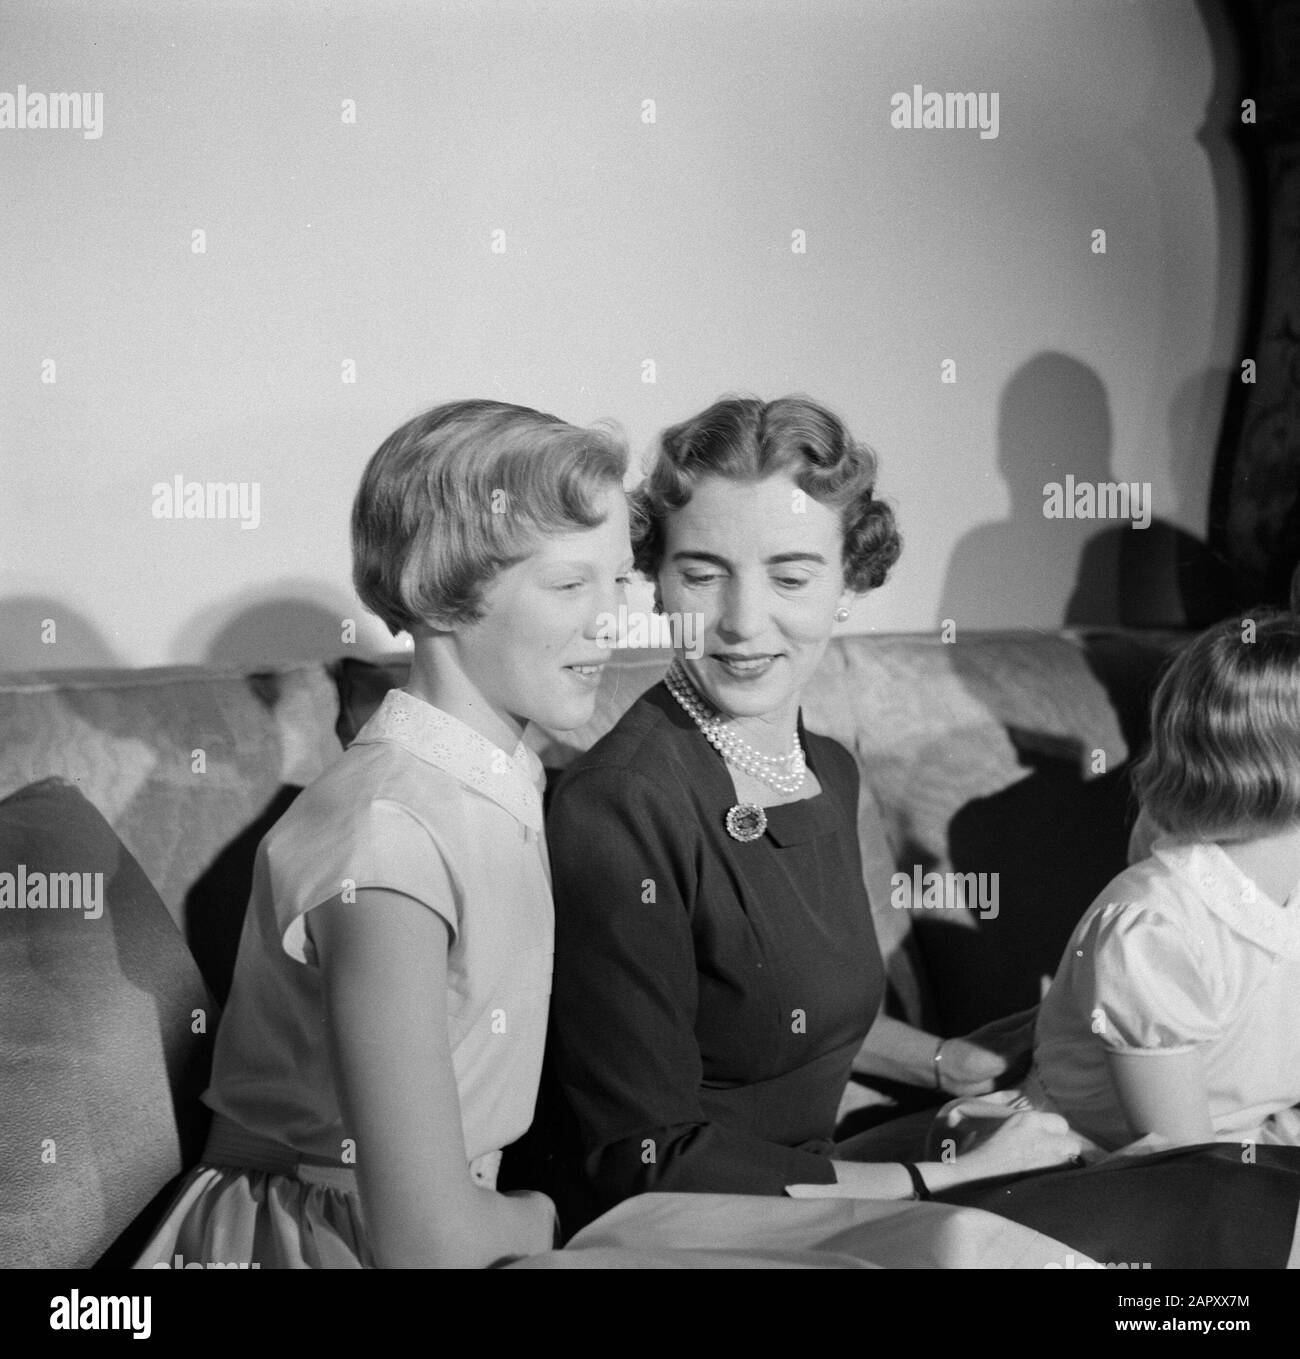 family-photos-of-the-danish-royal-family-vlnr-princess-margrethe-queen-ingrid-and-princess-anne-marie-in-their-residence-in-brockdorff-palace-in-amalienborg-palace-date-march-1954-location-denmark-copenhagen-keywords-daughters-families-interiors-children-queens-furniture-mothers-parents-palaces-princesses-benches-personal-name-anne-marie-princess-denmark-ingrid-queen-denmark-margrethe-crown-princess-denmark-2APXX7M.jpg